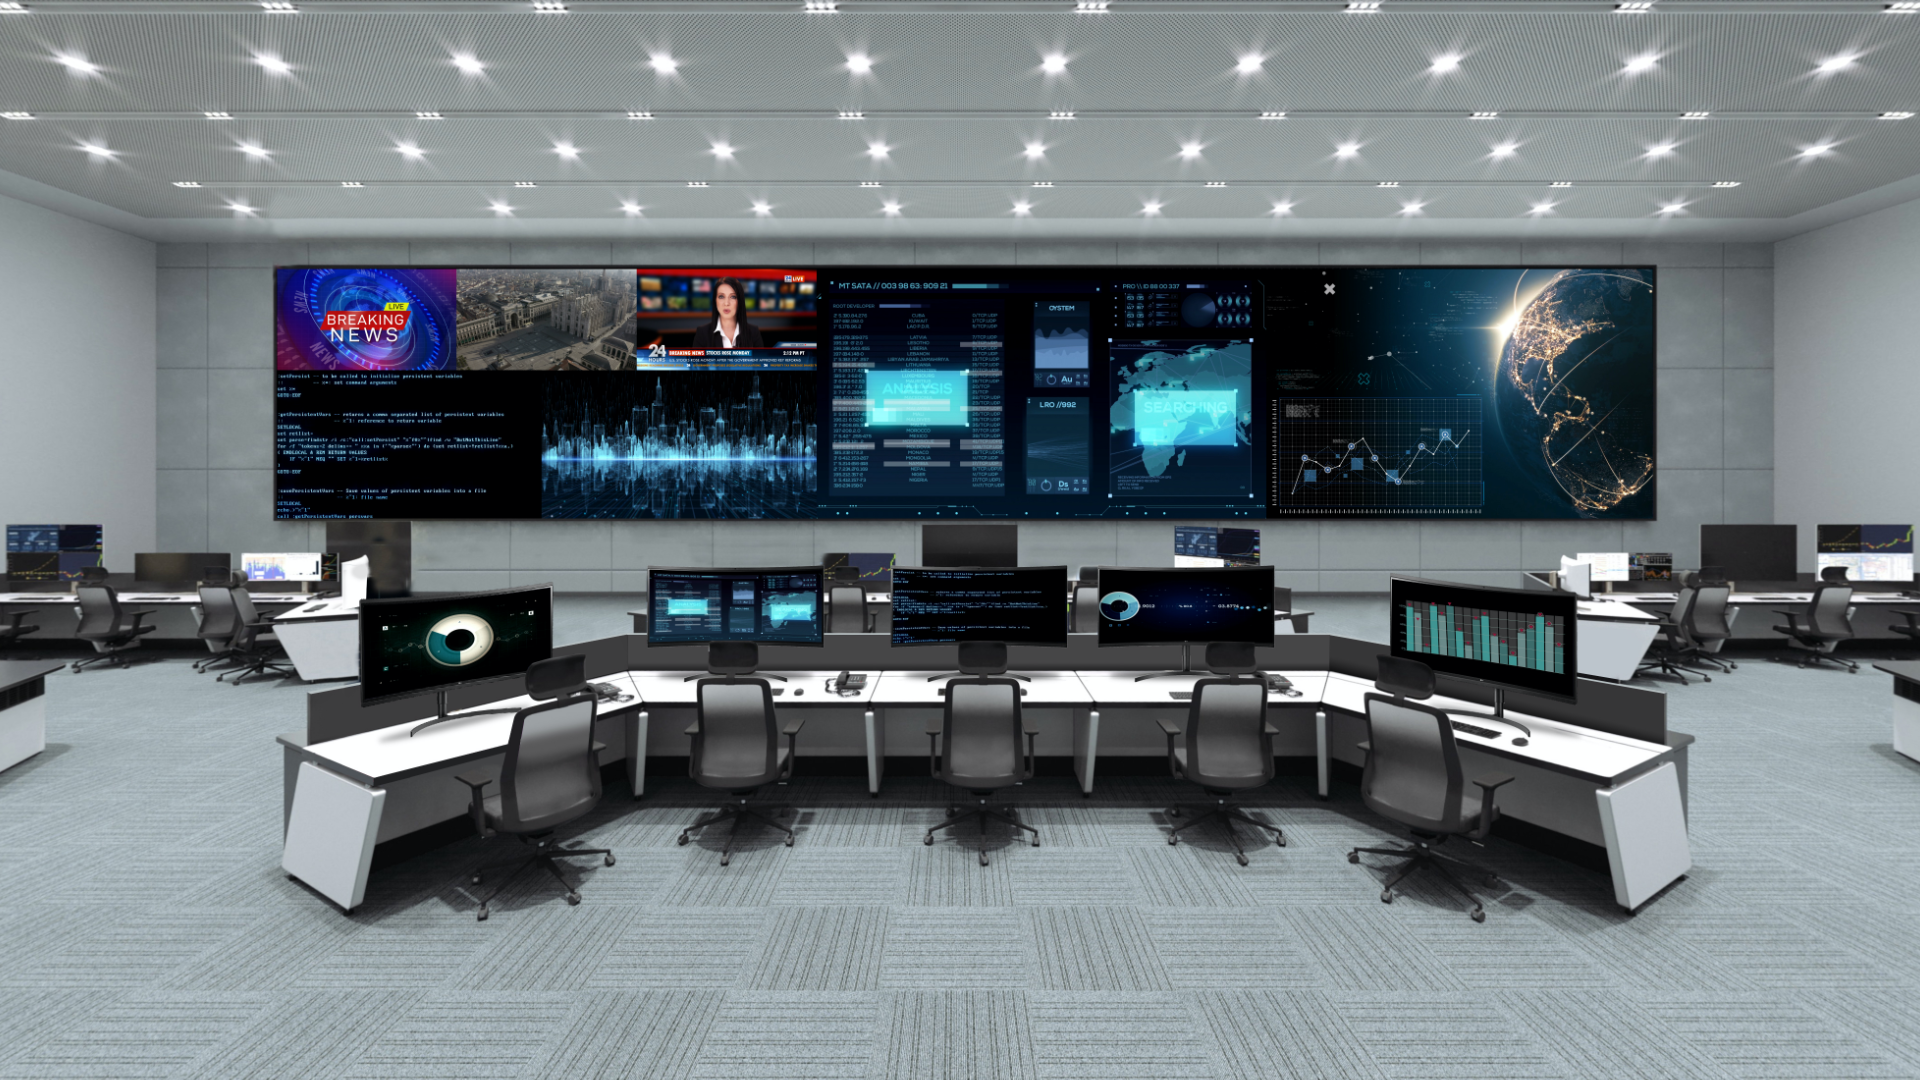 LG Control Room - Imagery - Network Operation Centers